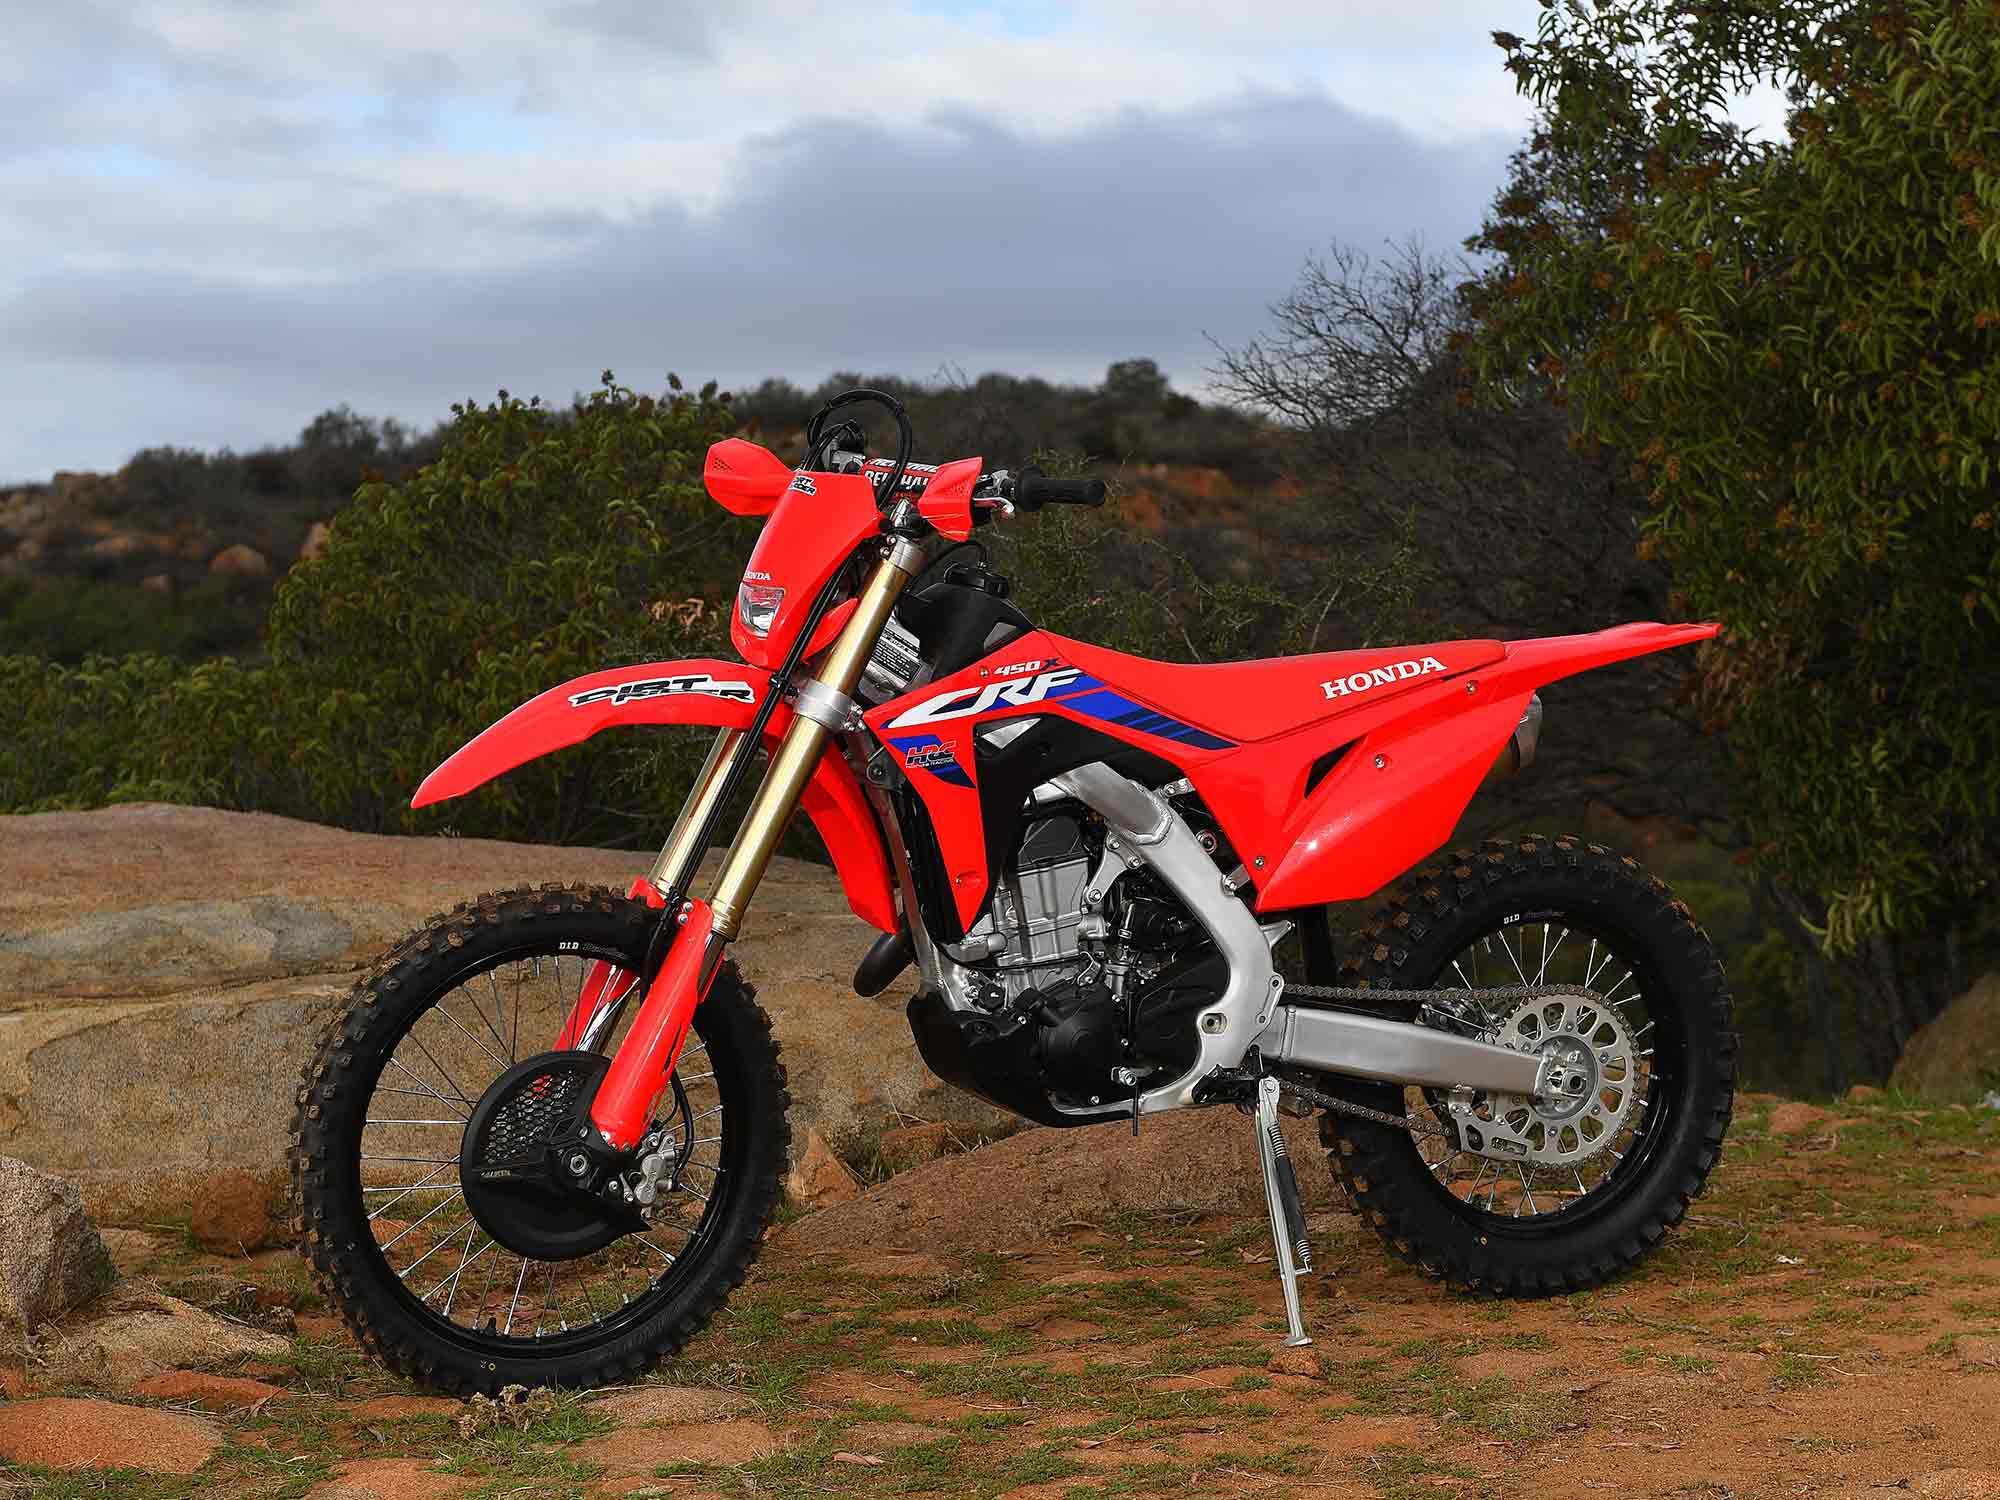 Perfect bike on a perfect San Diego, California, day. Chocolate Mountain Ranch provided an amazing backdrop for the Honda off-road introduction. The 96.0 x 62.1mm bore and stroke are akin to those of the CRF450R and CRF450RX designs. The 12.0:1 compression ratio is lower than that of the CRF450R and CRF450RX, while a three-ring piston design ensures traditional Honda reliability.